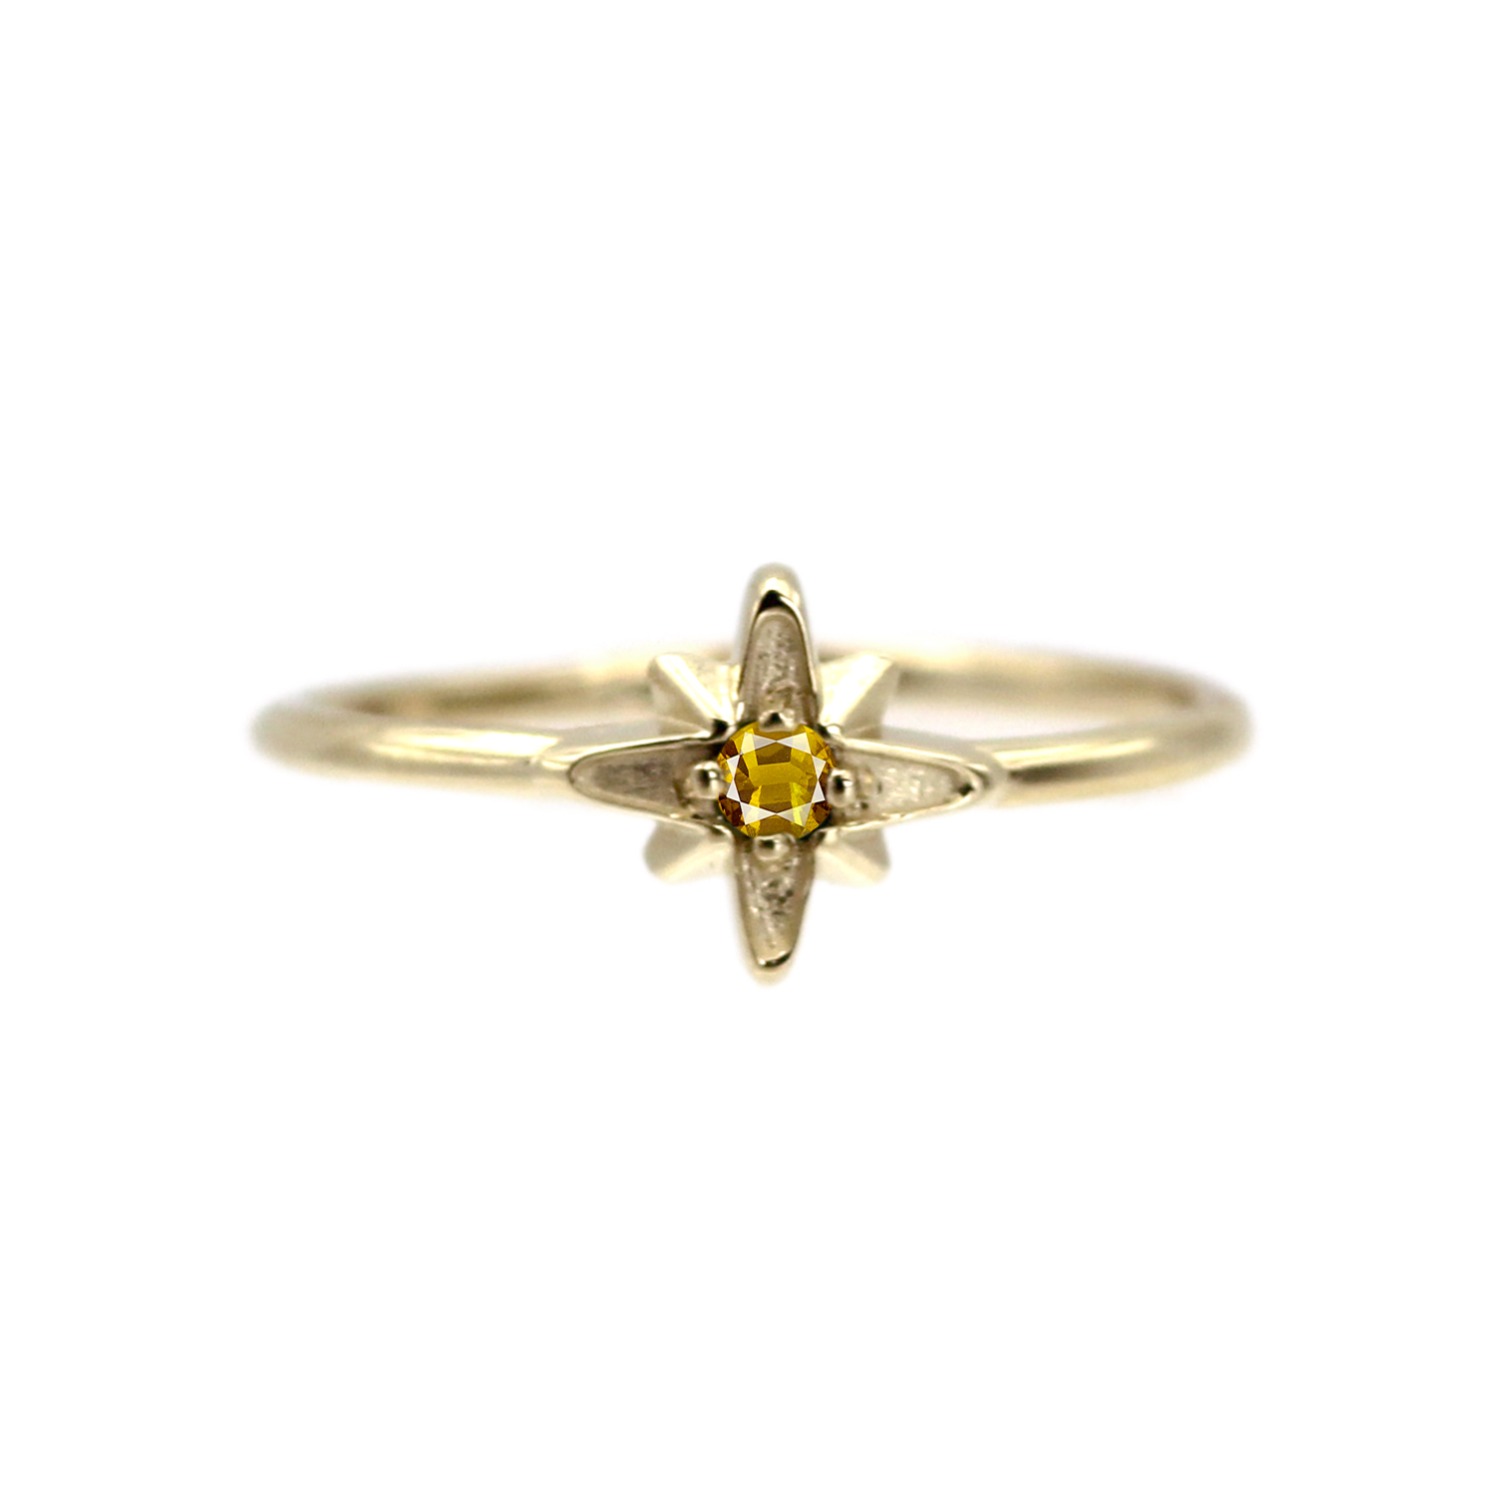 Unique Thin Rope Design Yellow Gold Ring